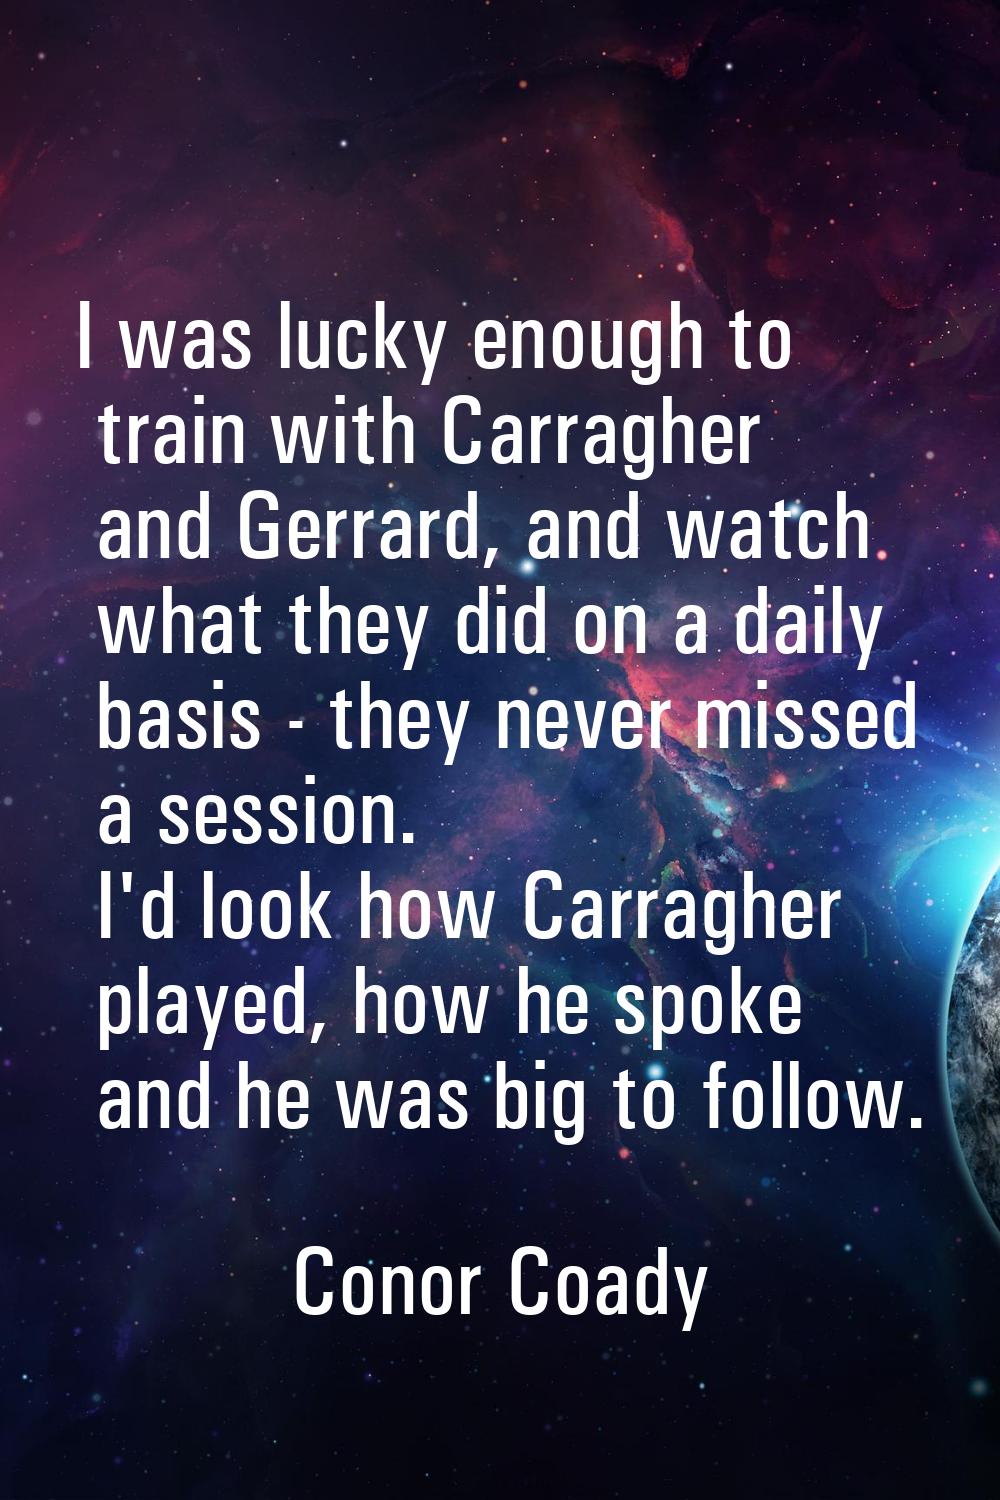 I was lucky enough to train with Carragher and Gerrard, and watch what they did on a daily basis - 